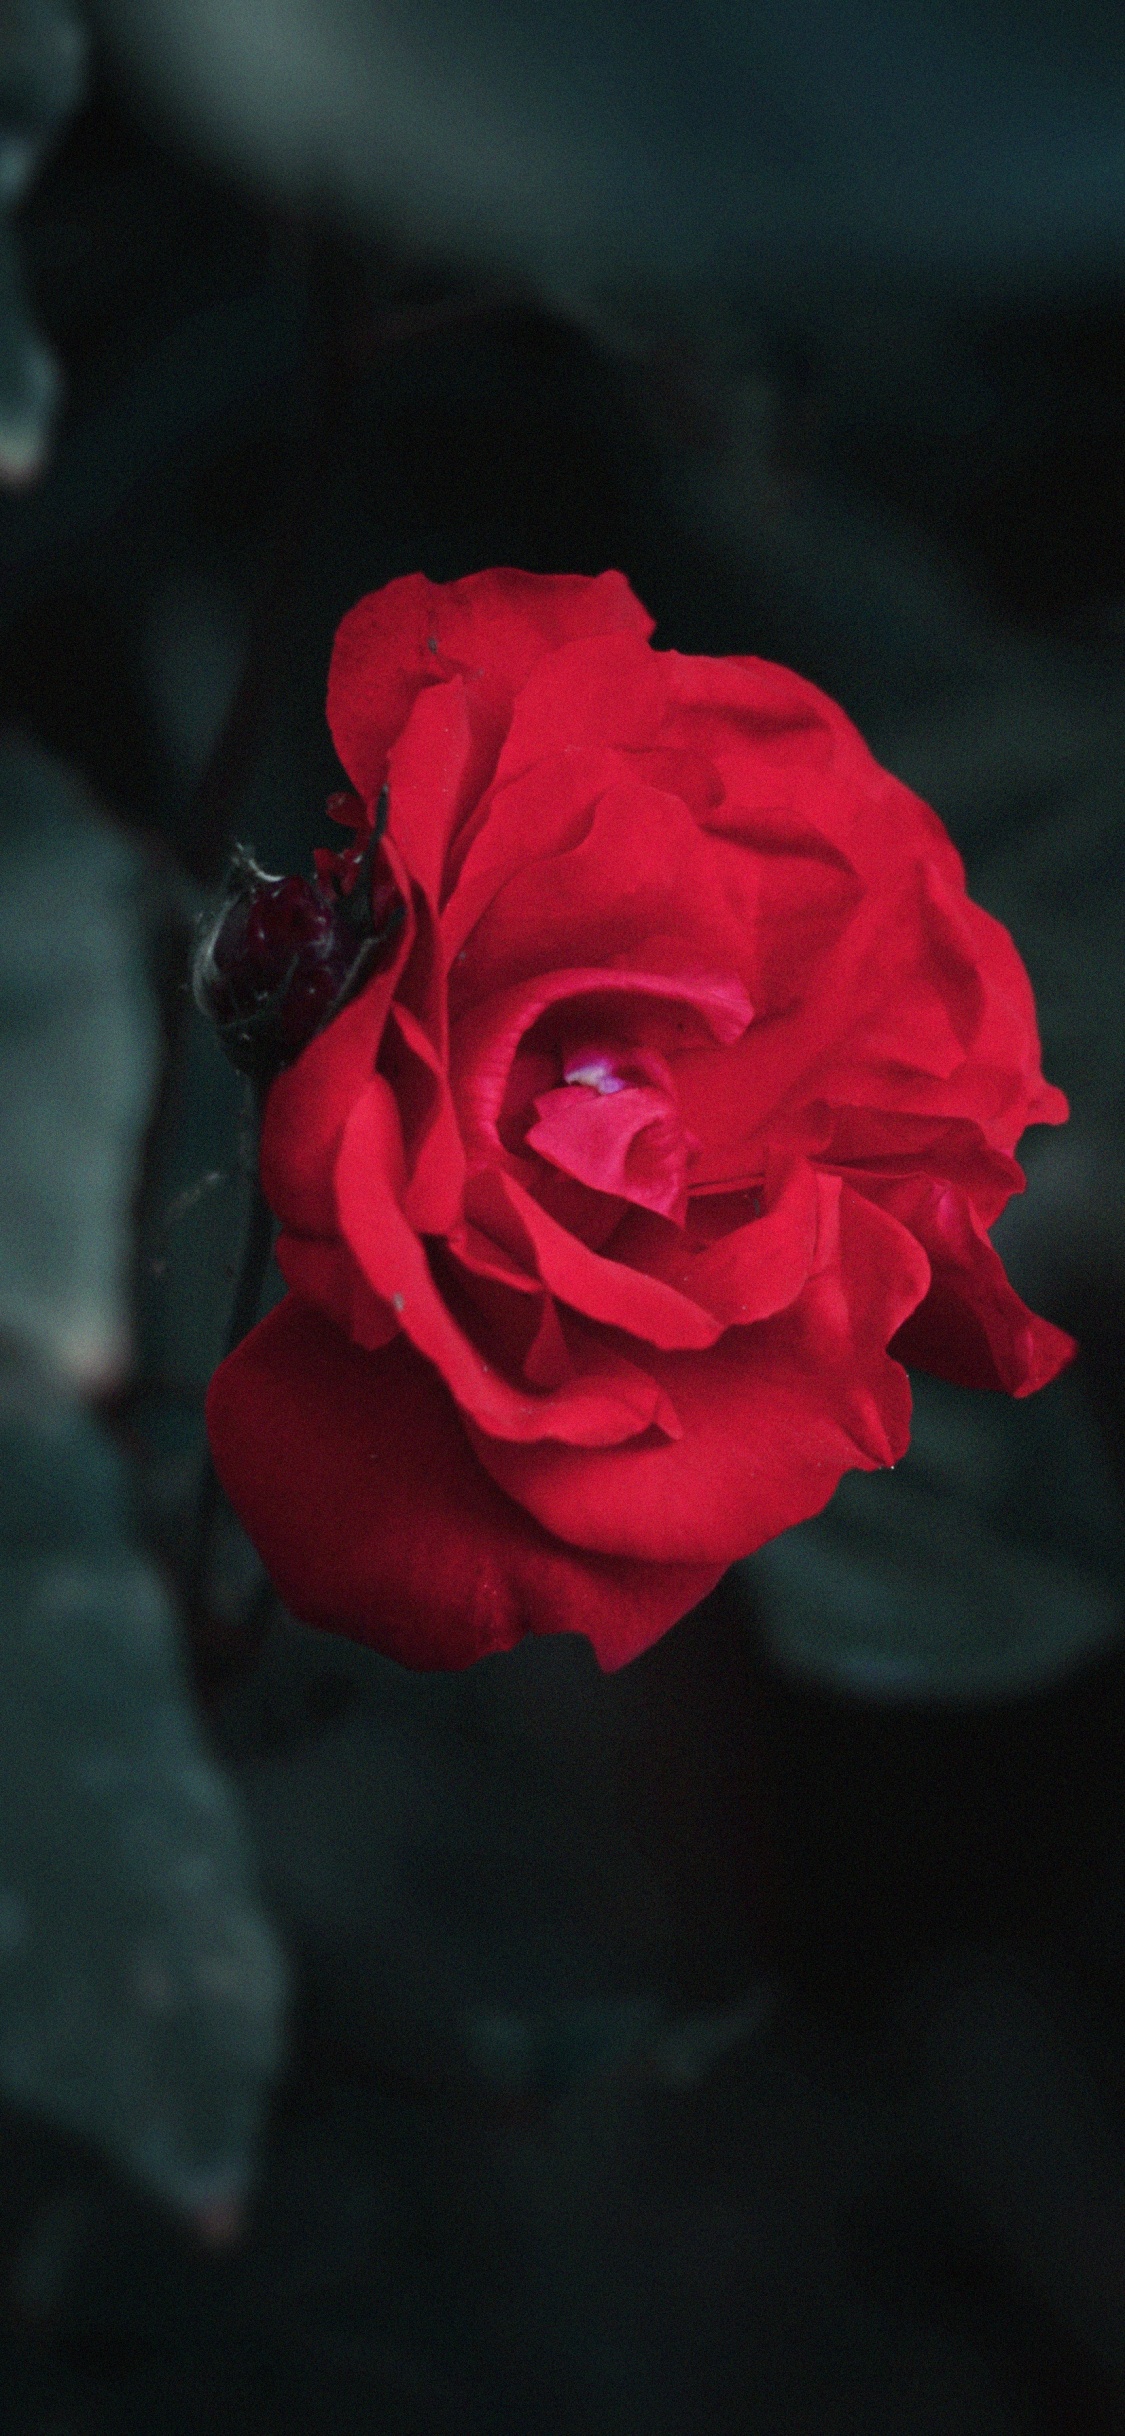 Red Rose in Close up Photography. Wallpaper in 1125x2436 Resolution